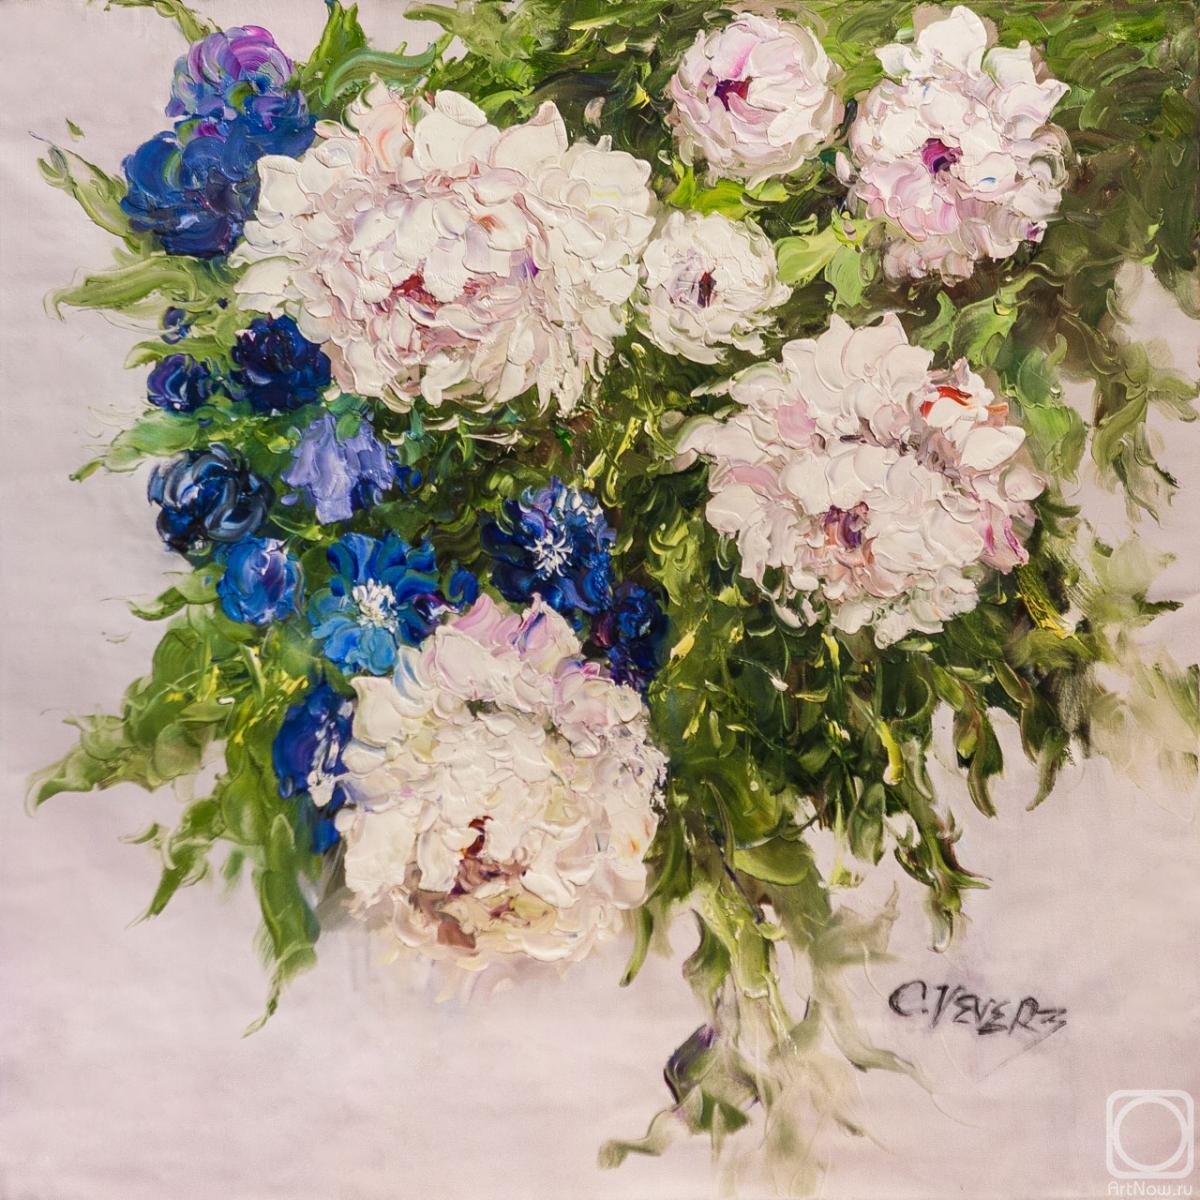 Vevers Christina. Bouquet of white peonies and cornflowers